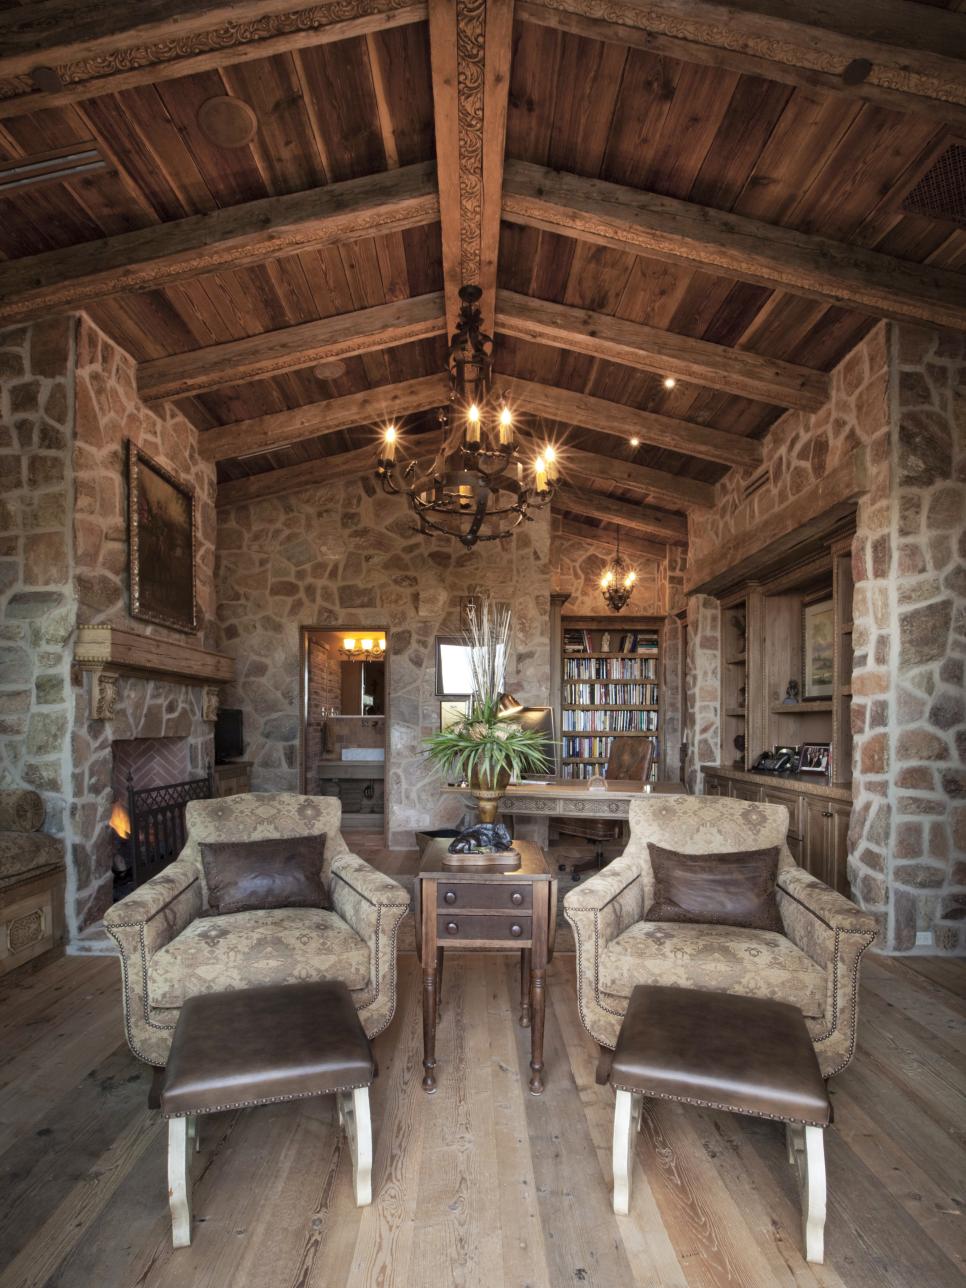 Stone Office With Upholstered Chairs, Wood Ceiling and Stone Walls